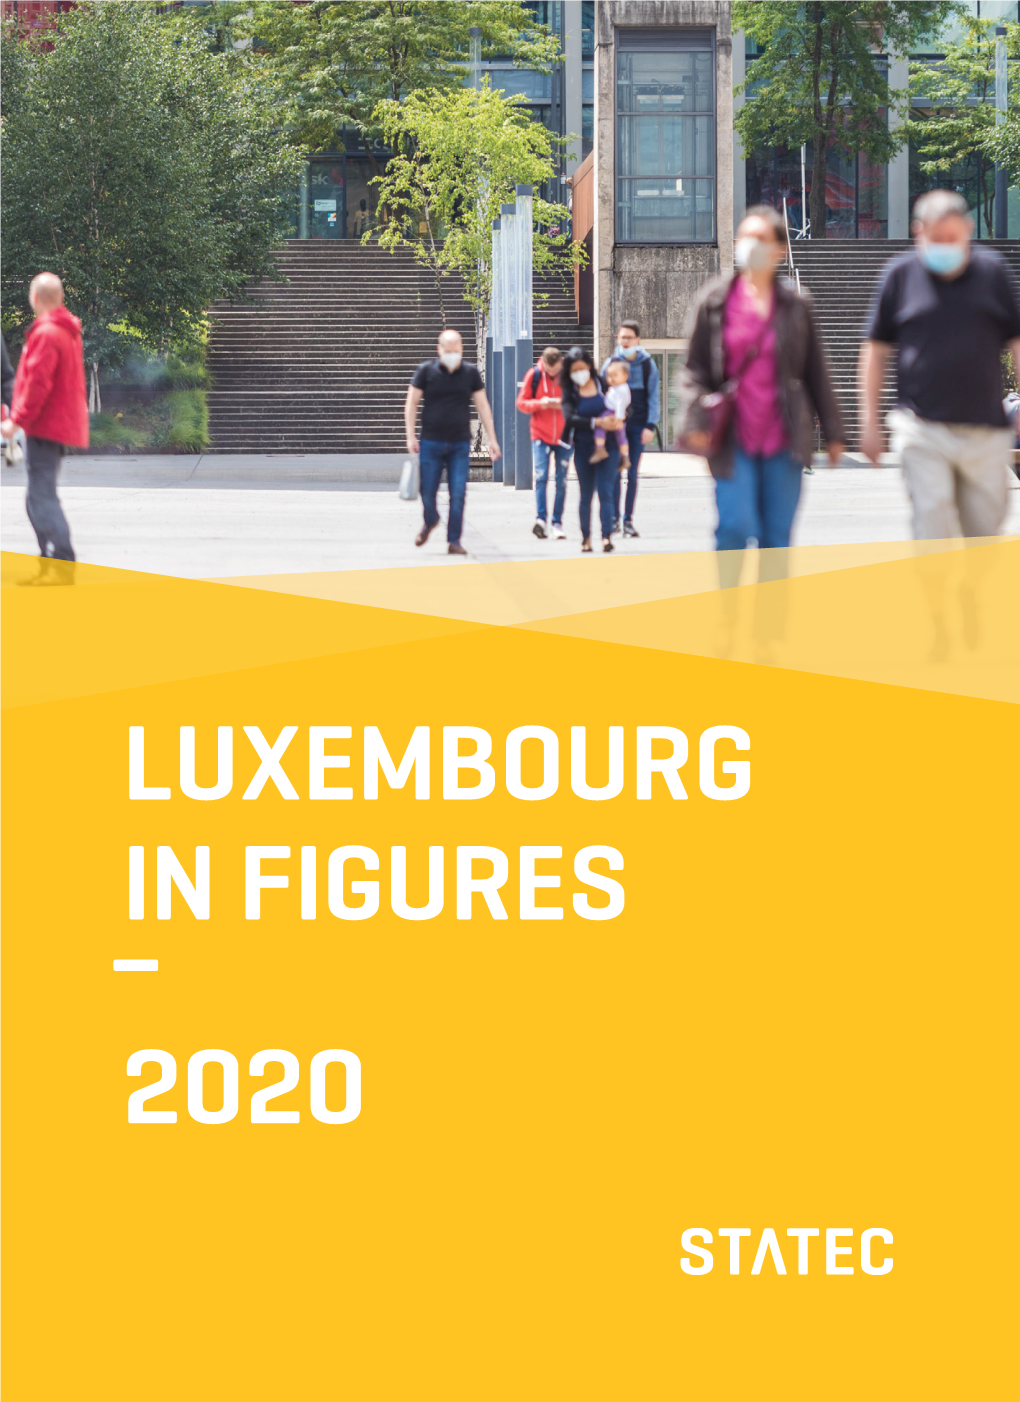 Luxembourg in Figures – 2020 Contents